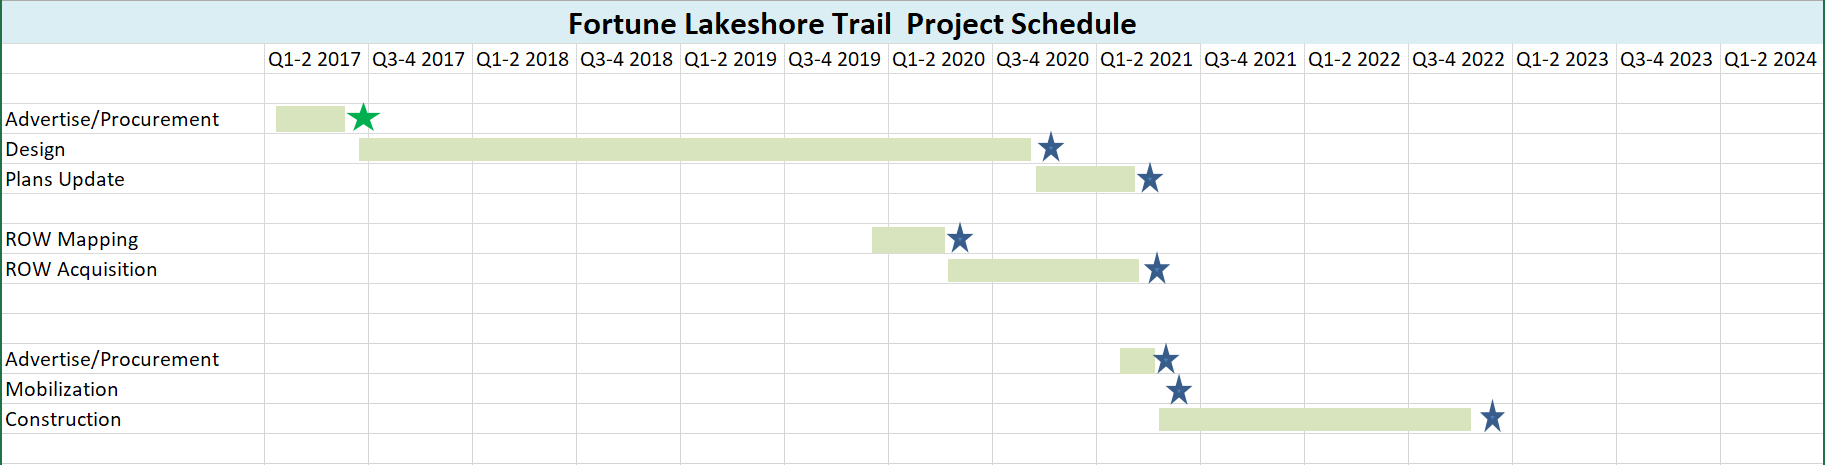 Fortune-Lakeshore Trail Project Documents